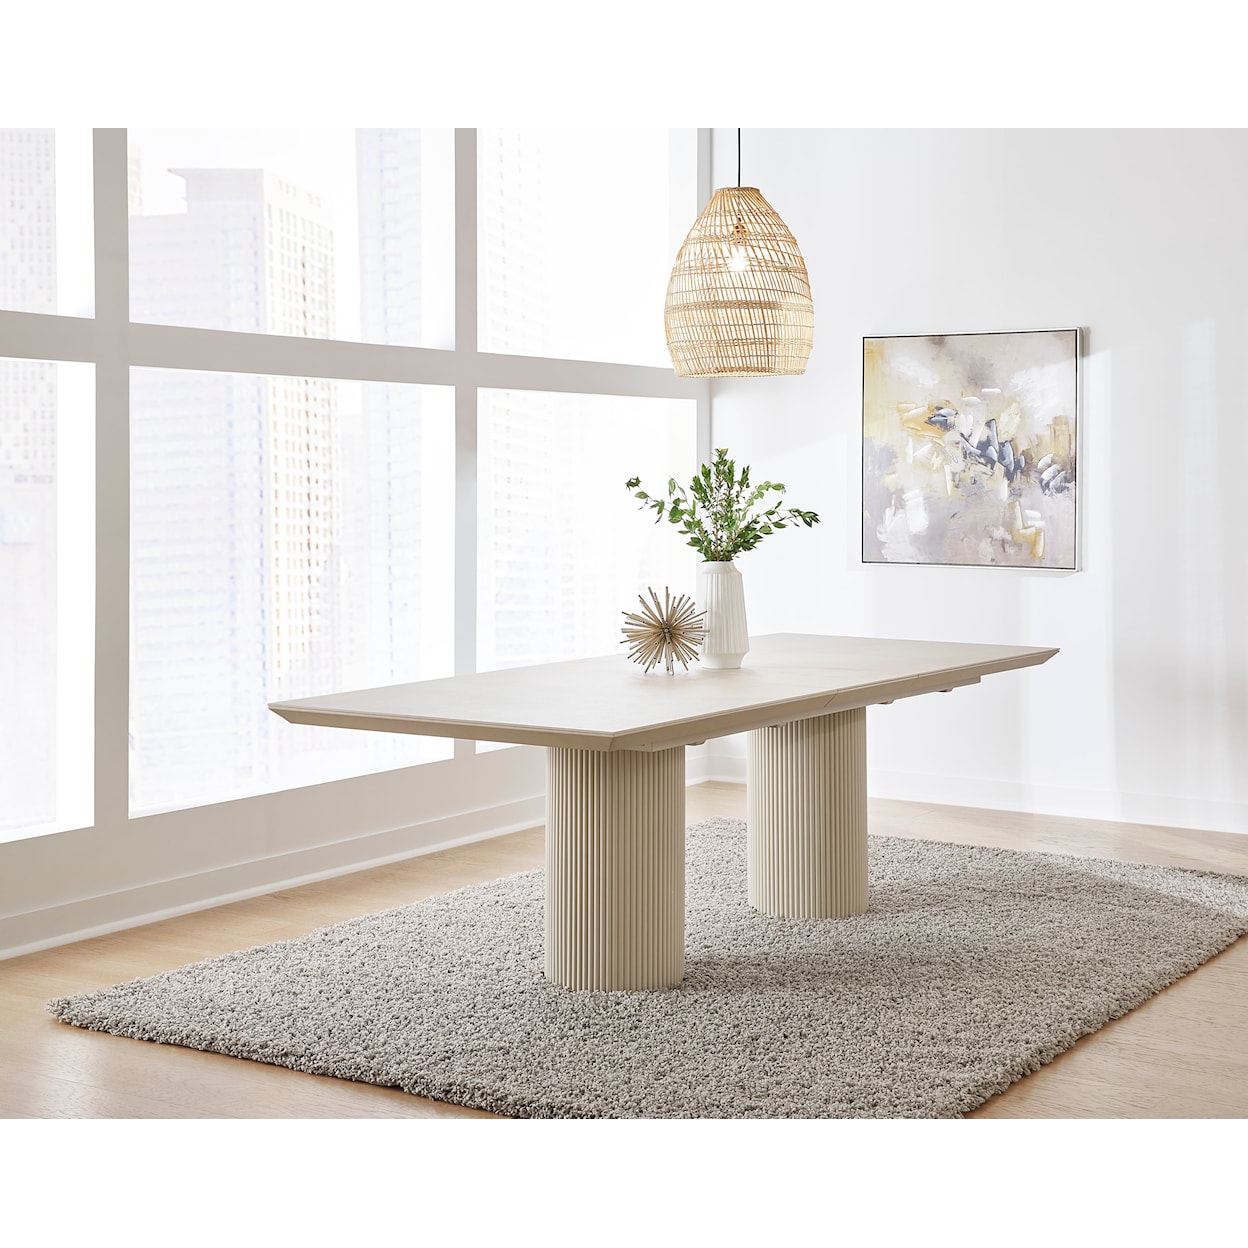 Modus International Crossroads 2.0 Cannon Stone Top Extension Dining Table